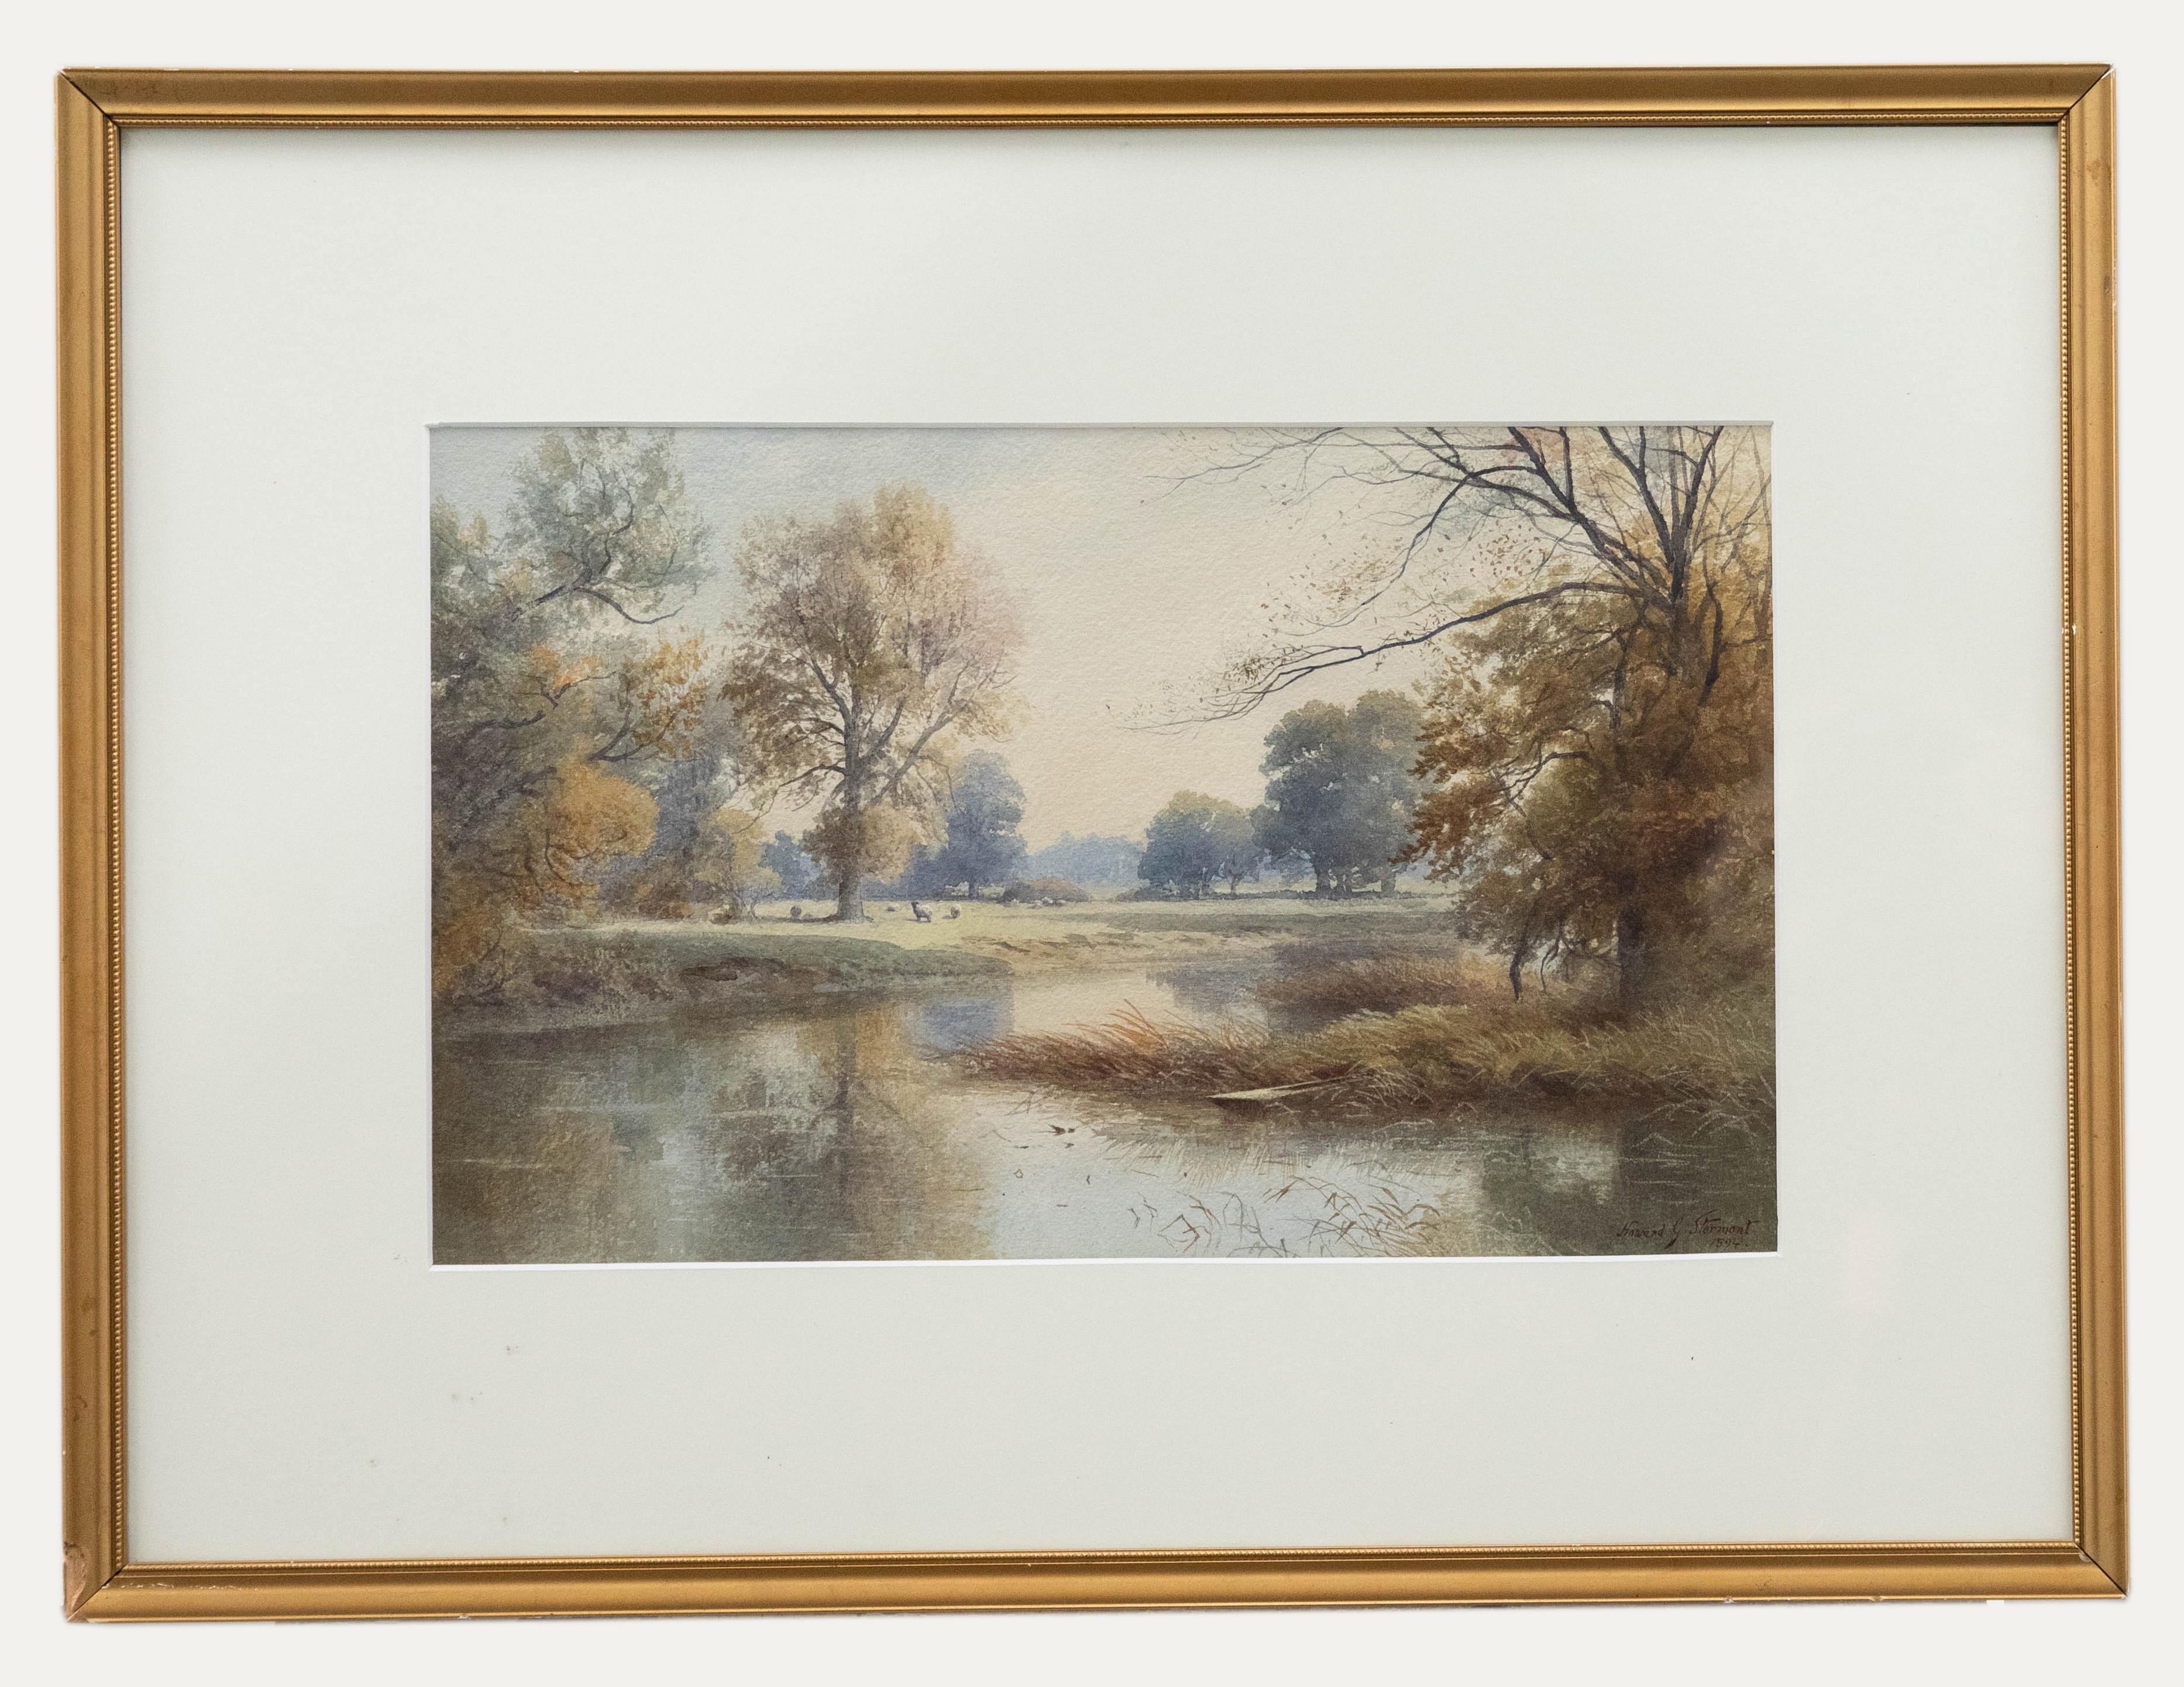 Unknown Landscape Art - Howard Gull Stormont (1844-1923) - Framed Watercolour, View from the River Bend